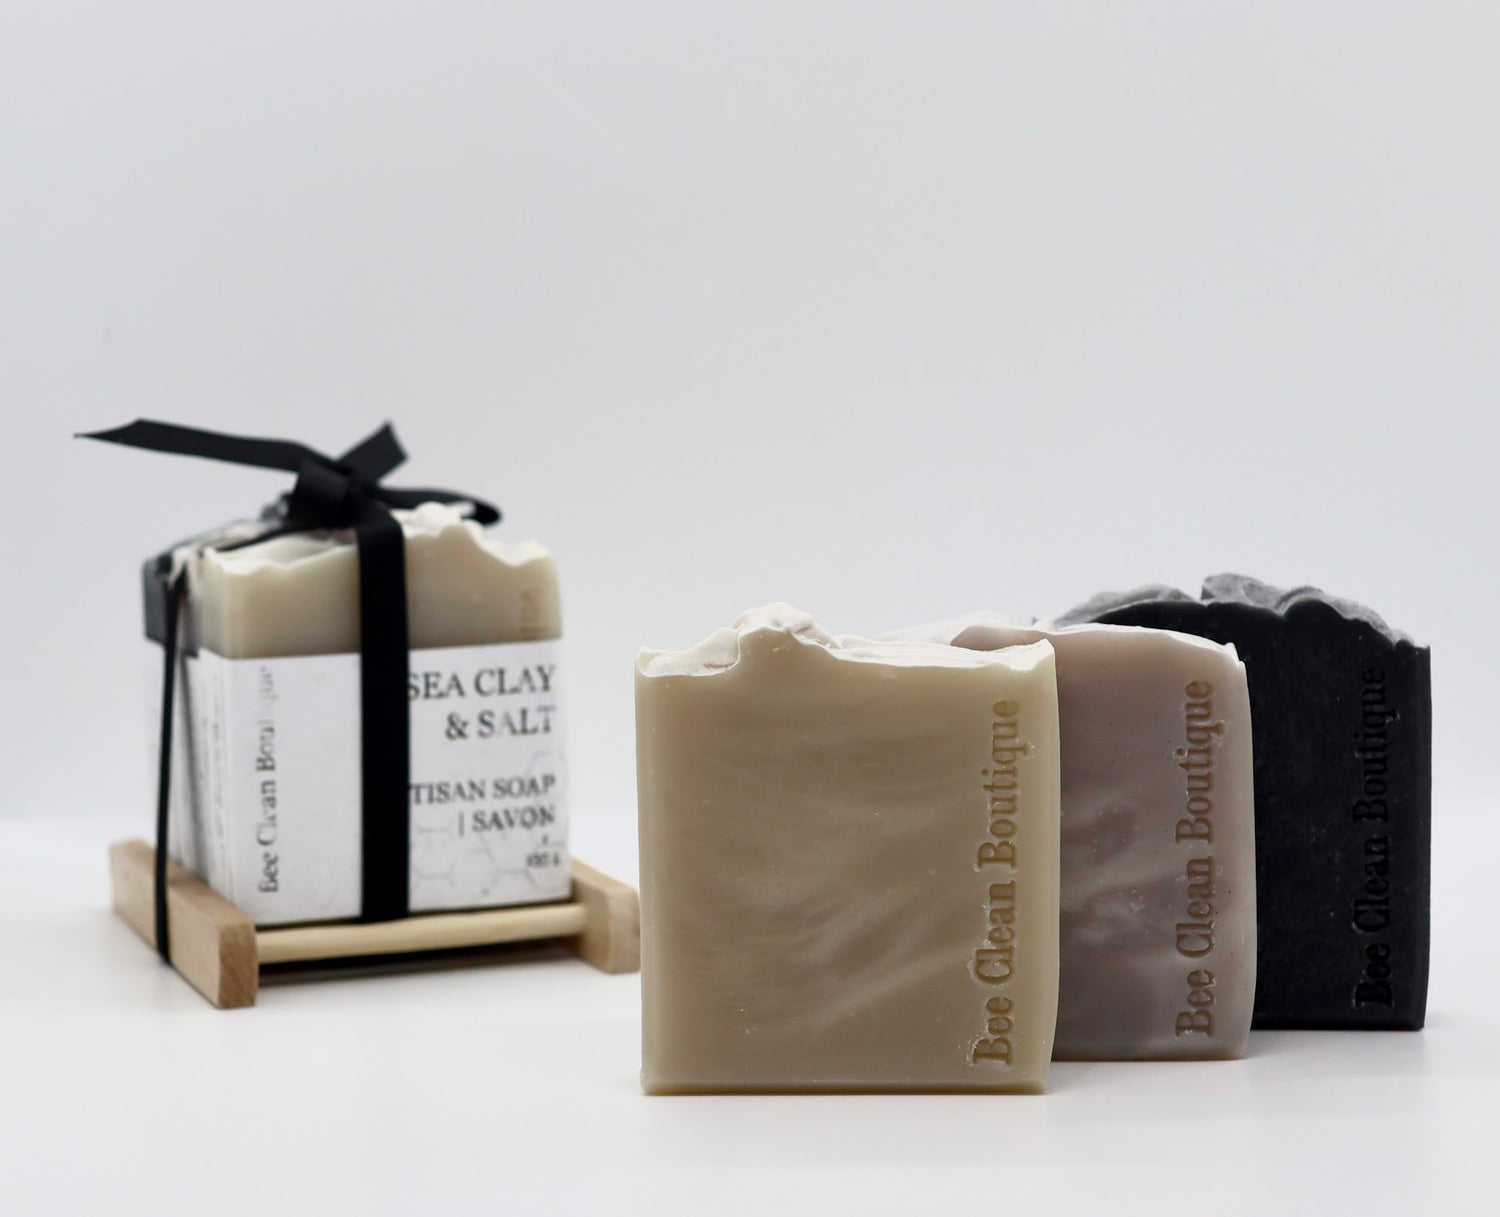 Set of 3 handmade soaps for men, displayed individually and also in a bundle tied with black ribbon on a wooden soap dish